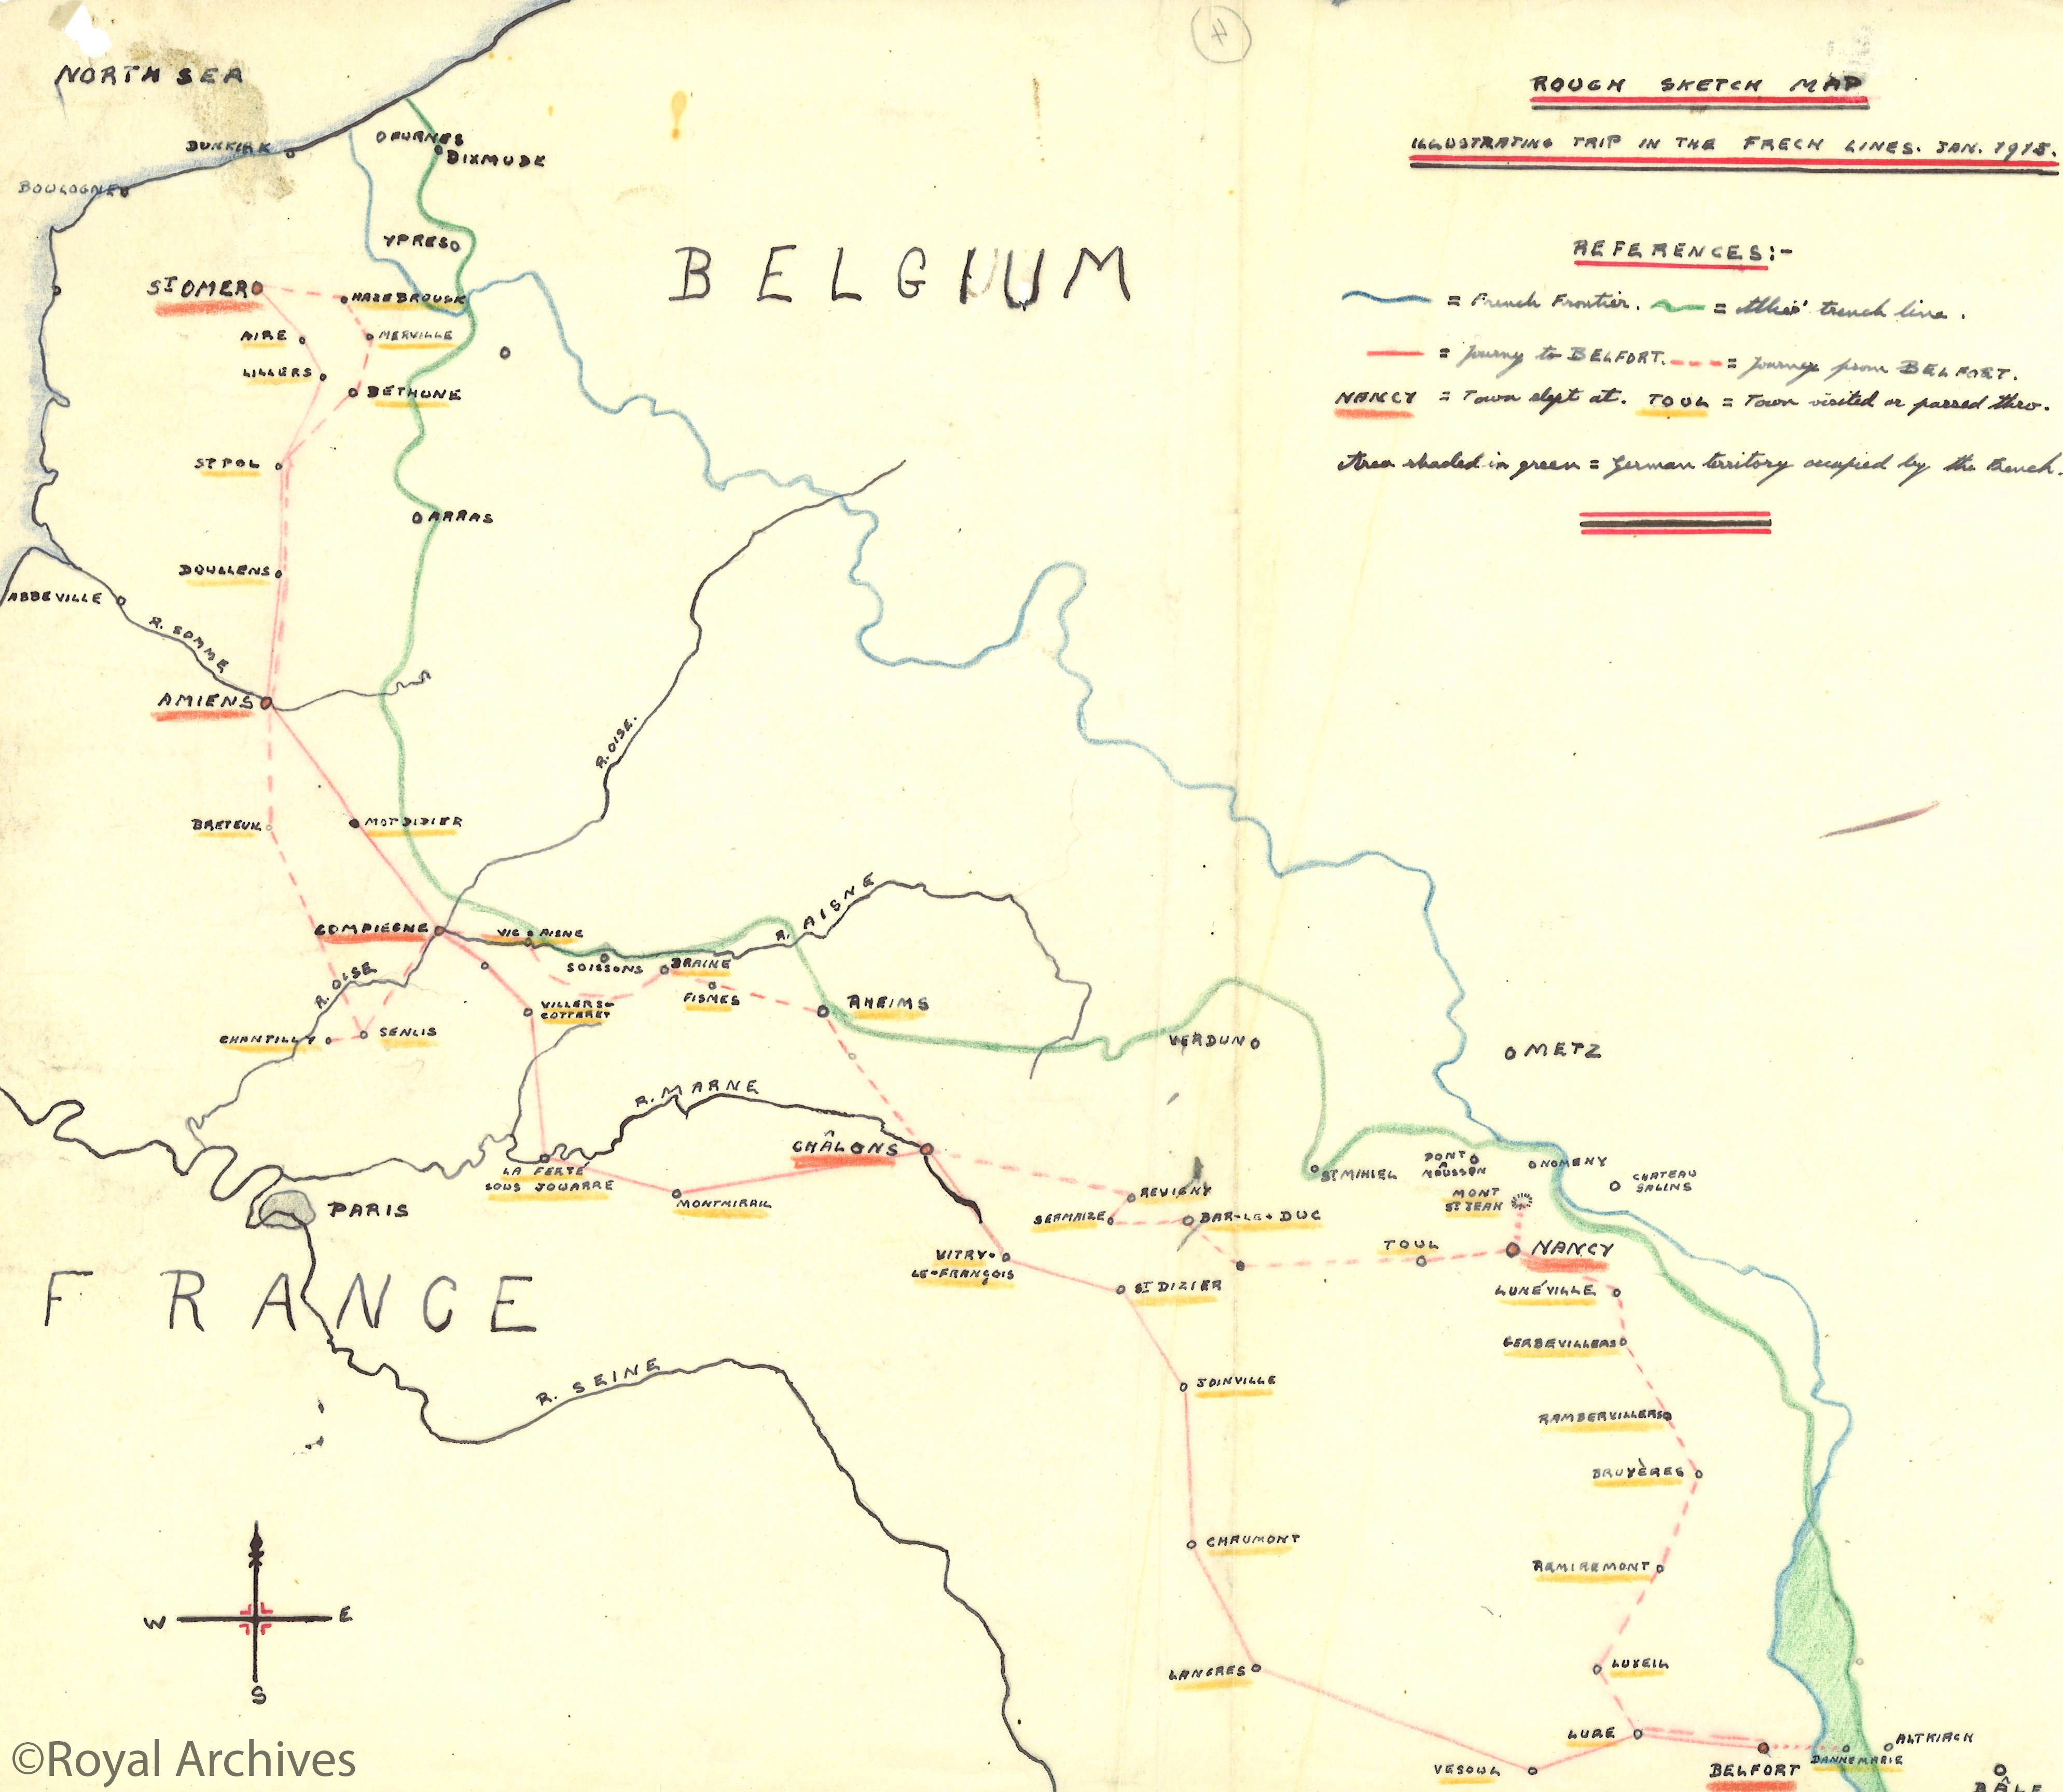 A map of French lines drawn by Edward Prince of Wales